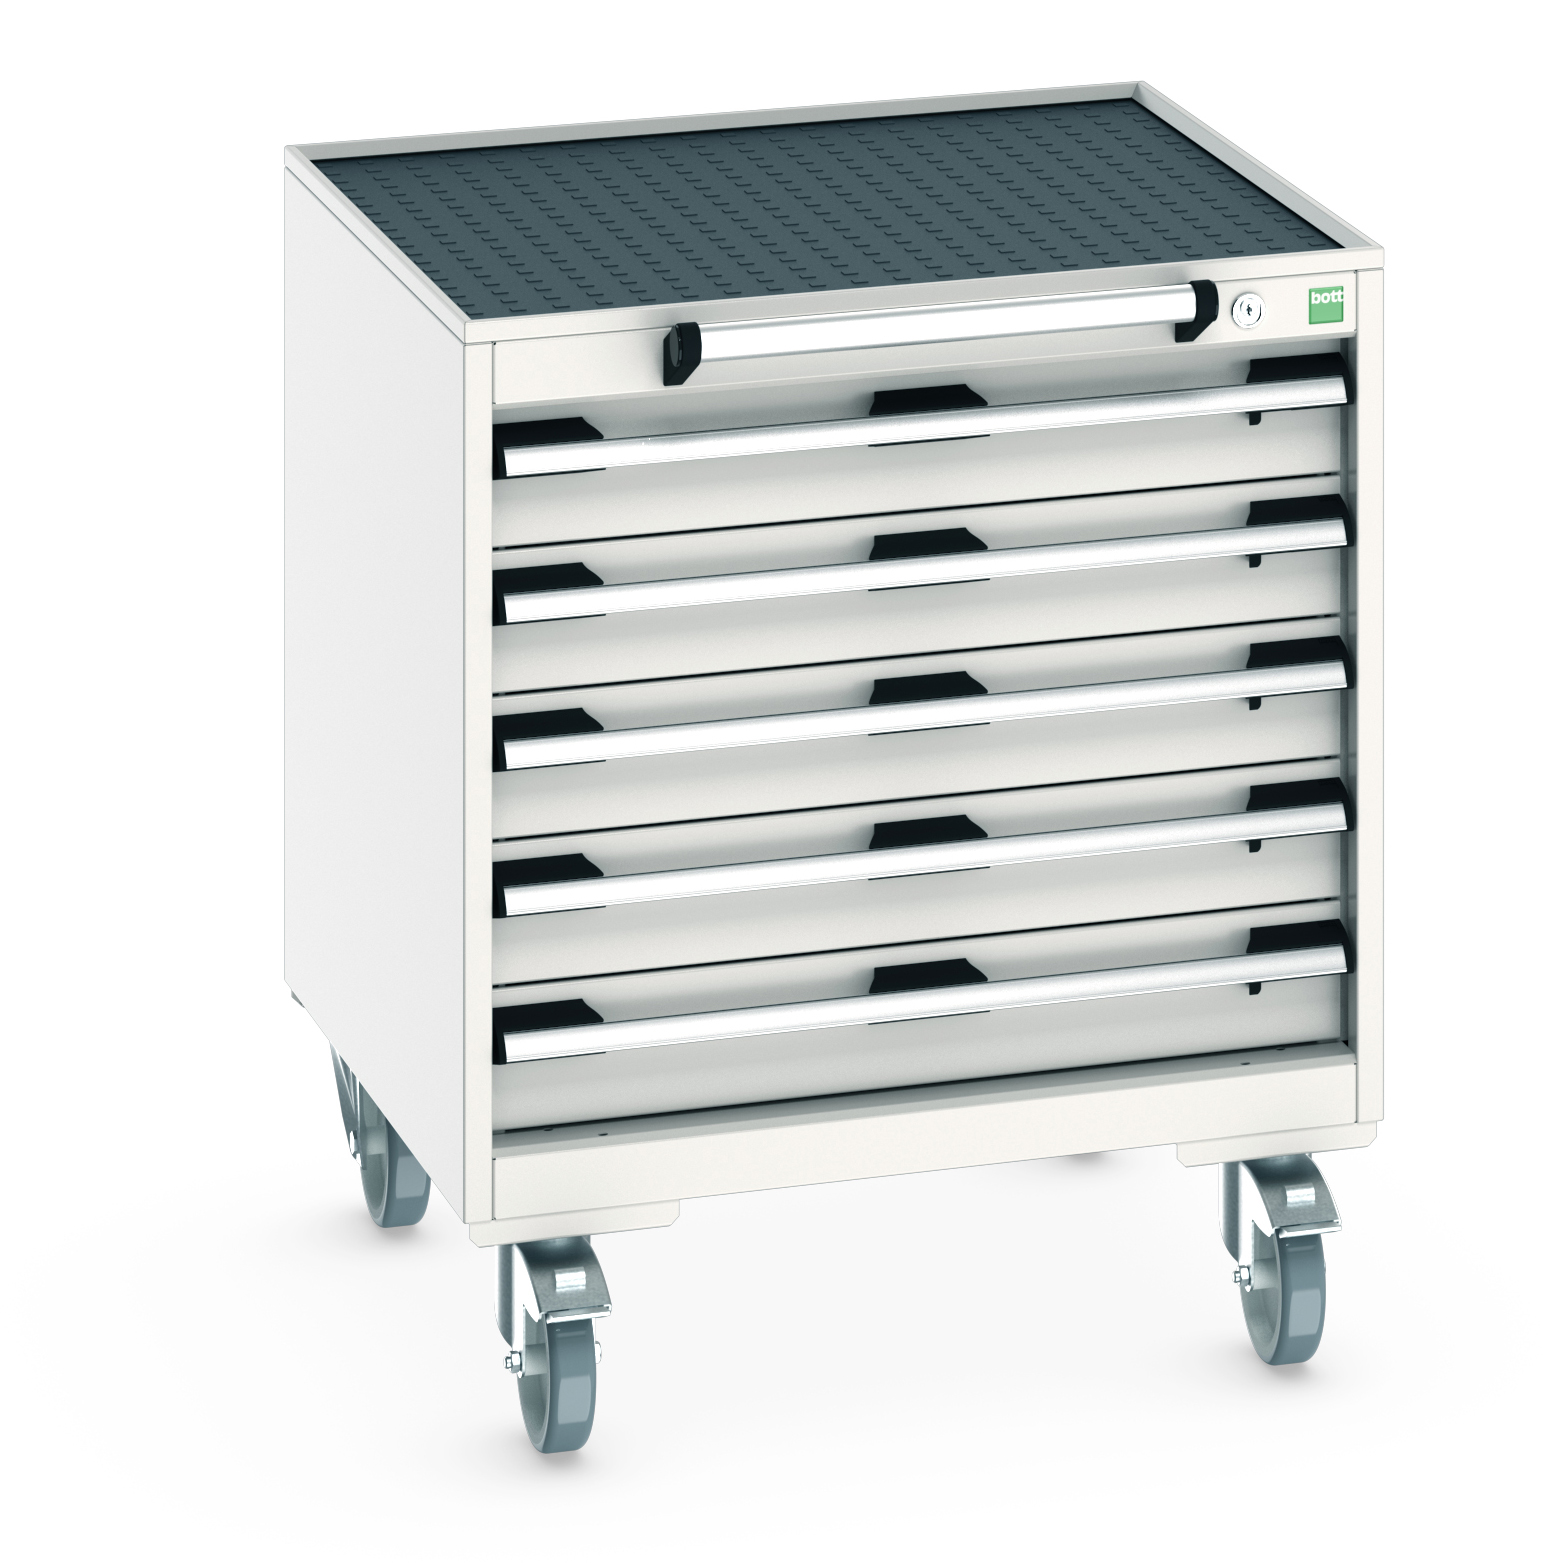 Bott Cubio Mobile Drawer Cabinet With 5 Drawers & Top Tray With Mat - 40402027.16V